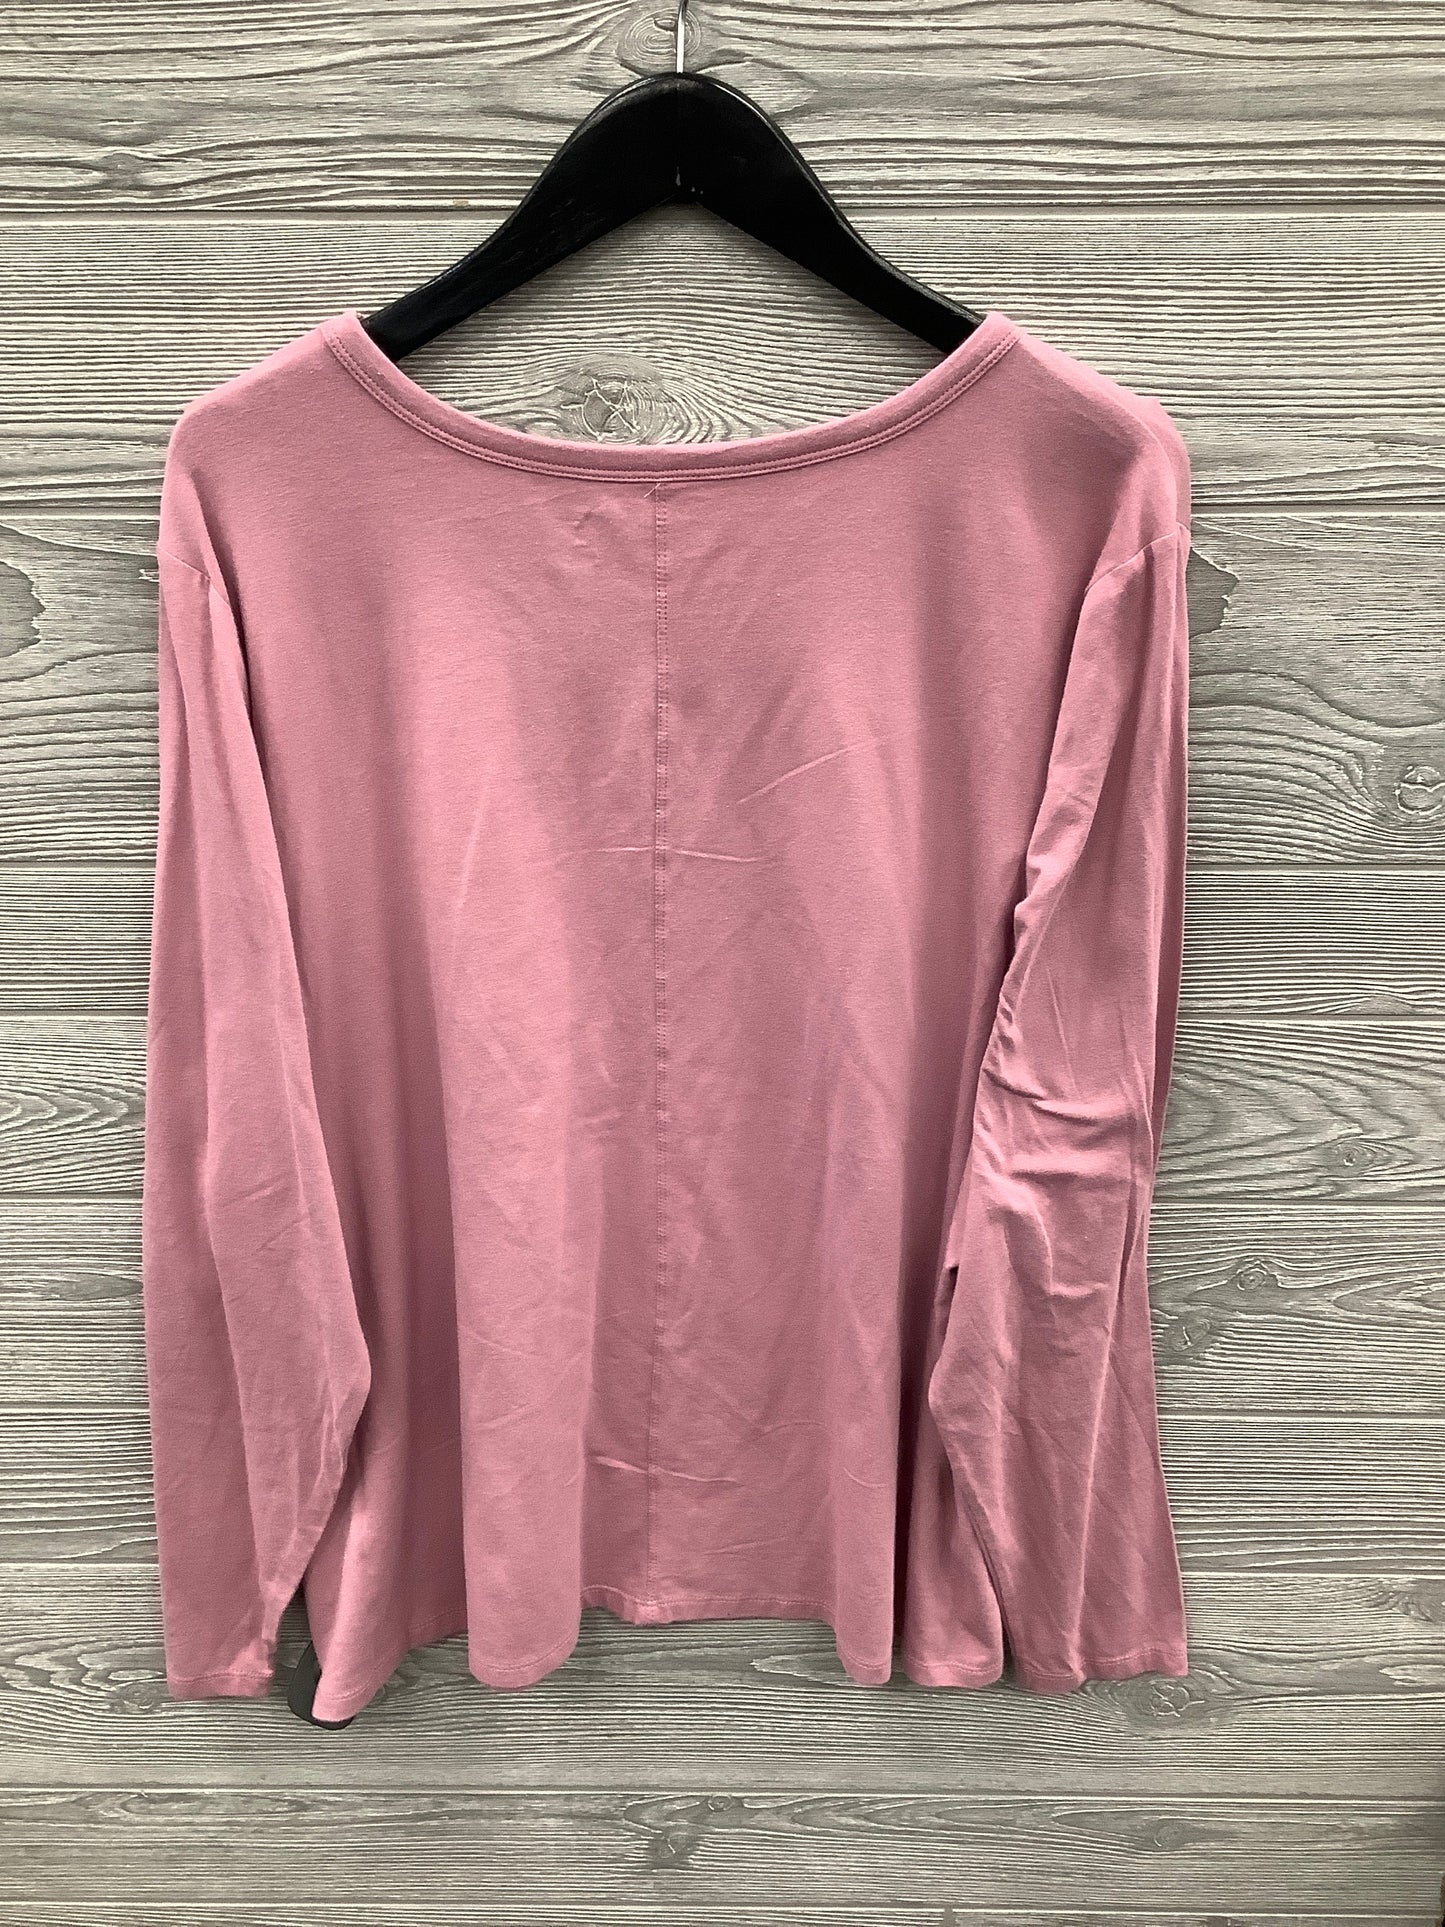 Top Long Sleeve Basic By Ana  Size: 2x